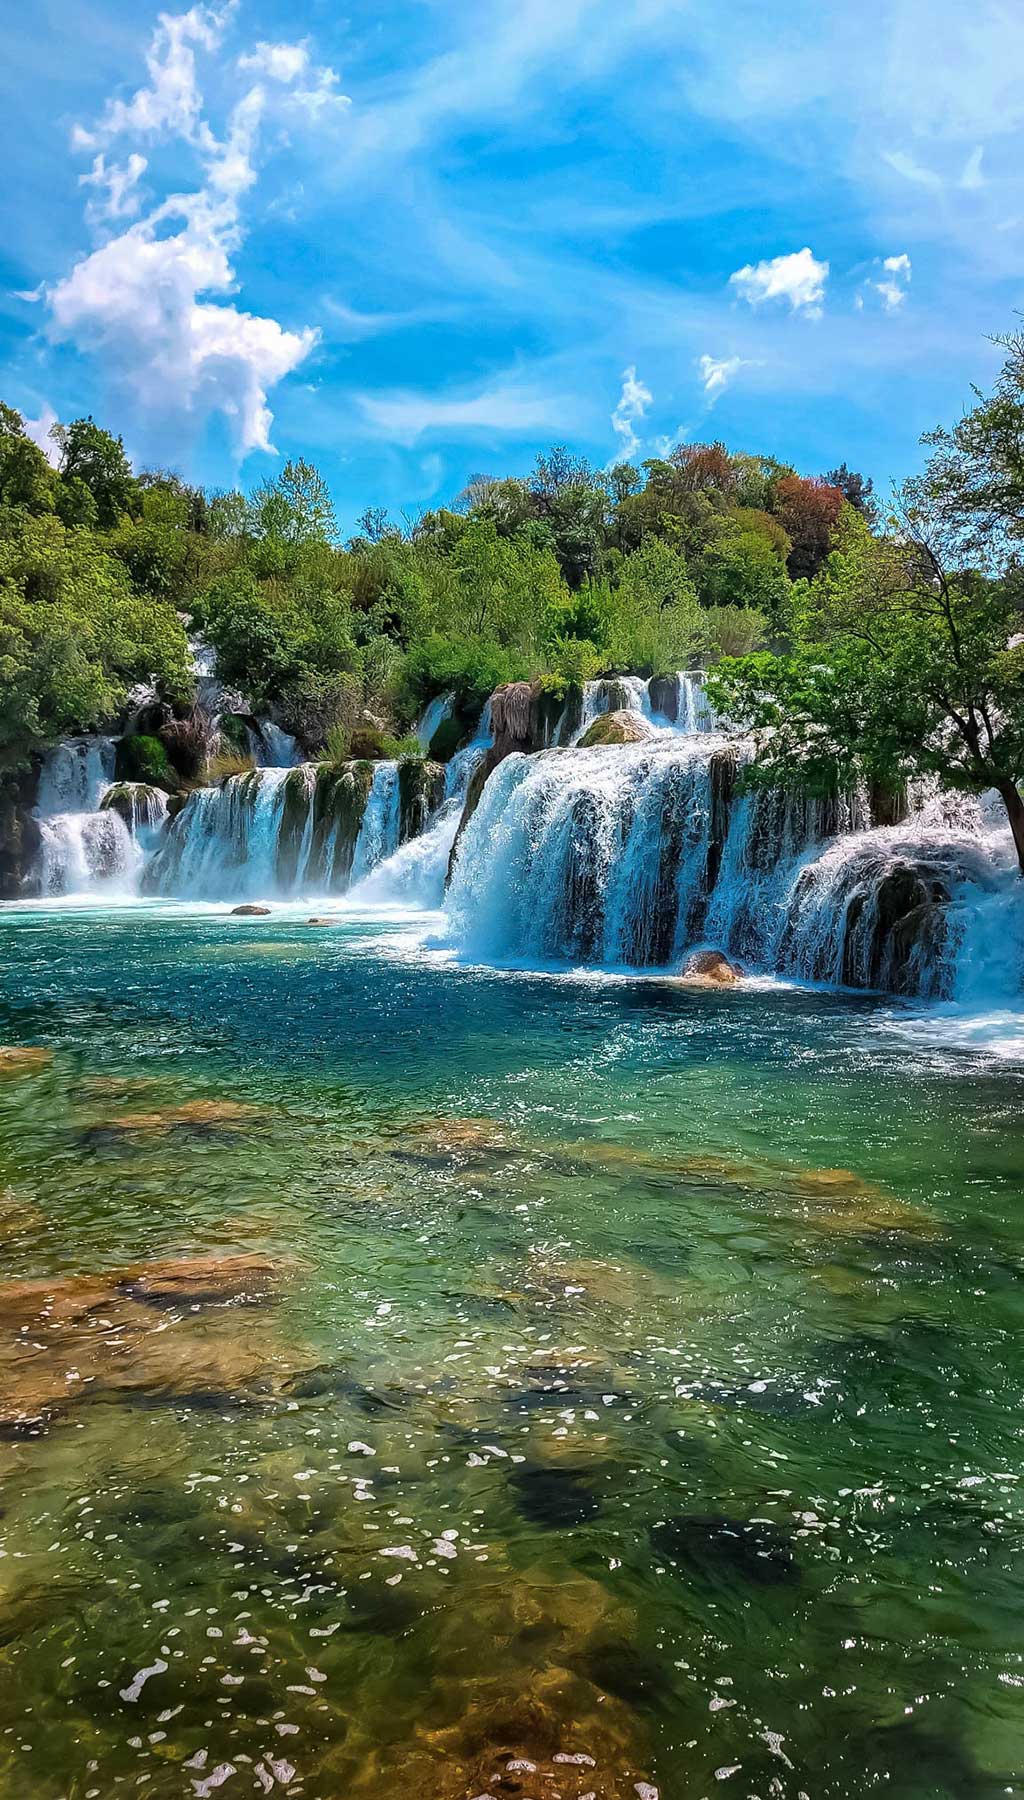 Skradinski buk is a waterfall surrounded by nature, offers trails & viewing areas plus a swimming spot.